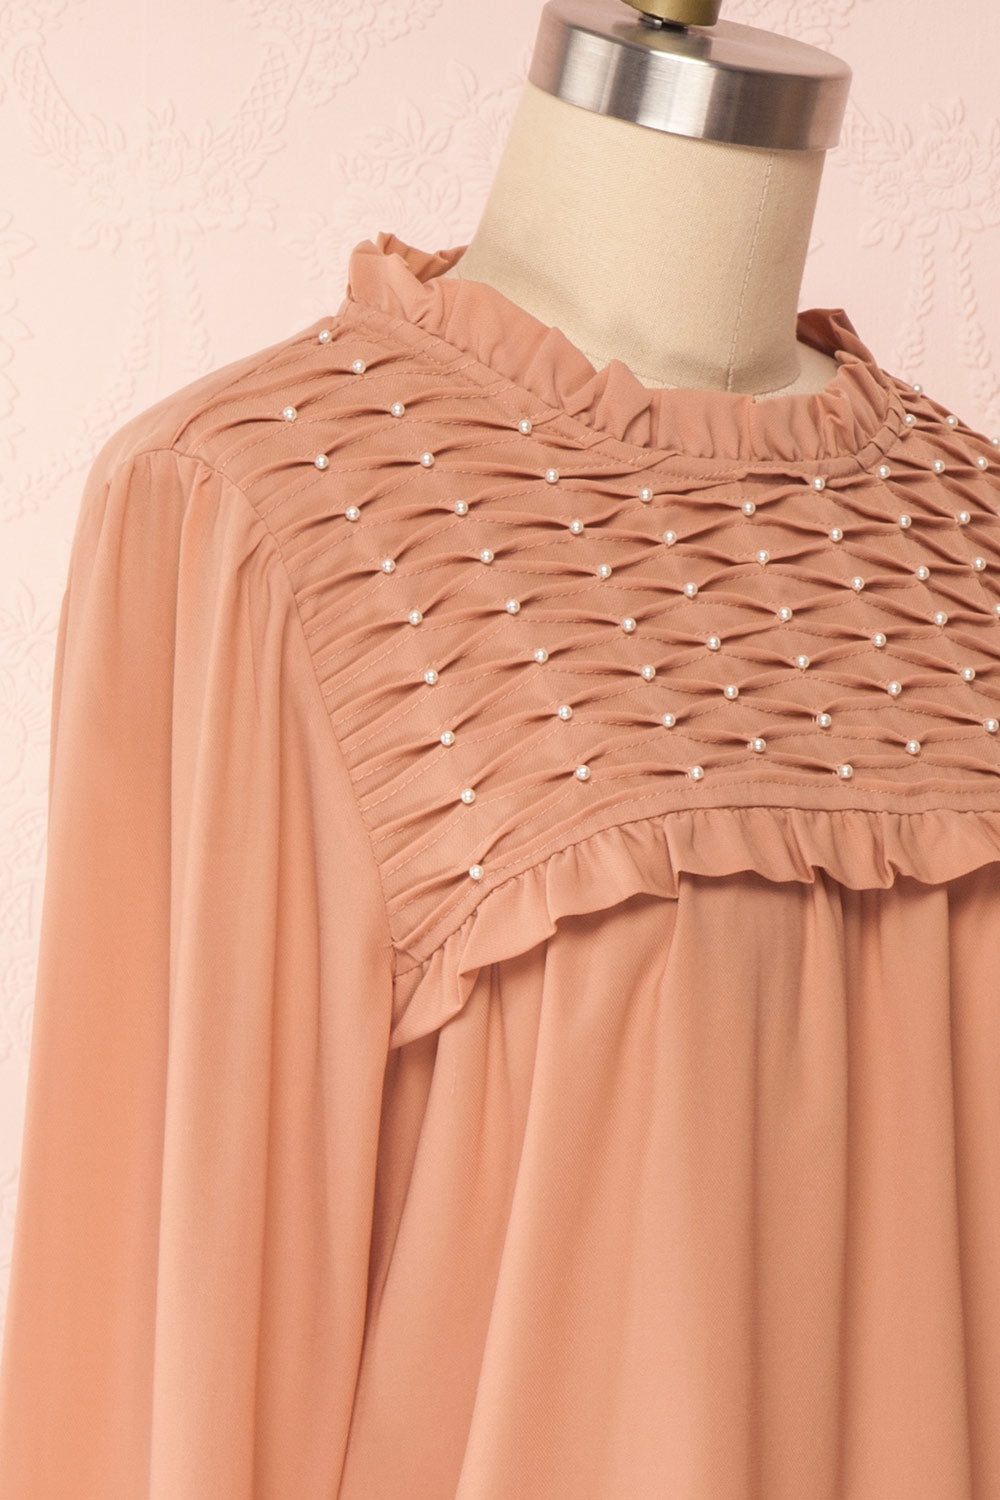 Jailene Blush Pink Chiffon Blouse with Pearls side close up | Boutique 1861